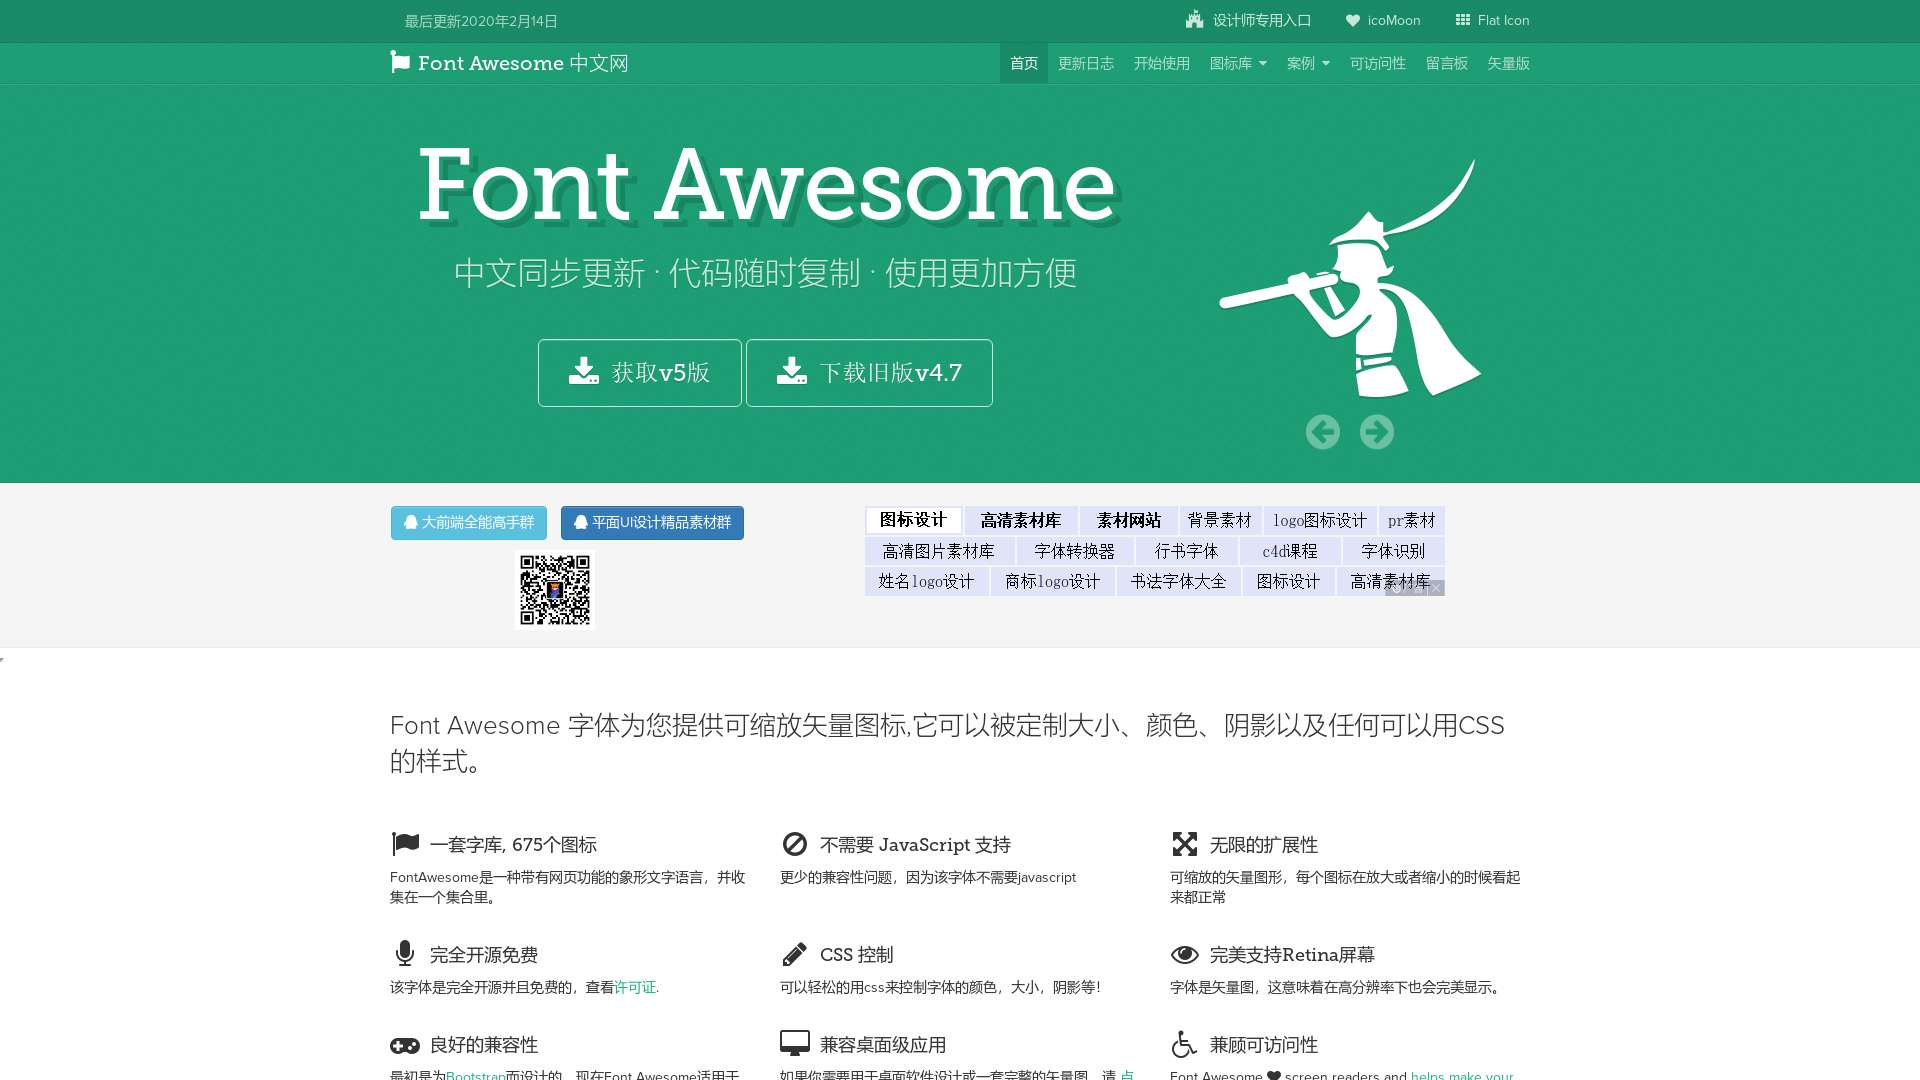 Font Awesome 中文网截图时间：2022-12-22